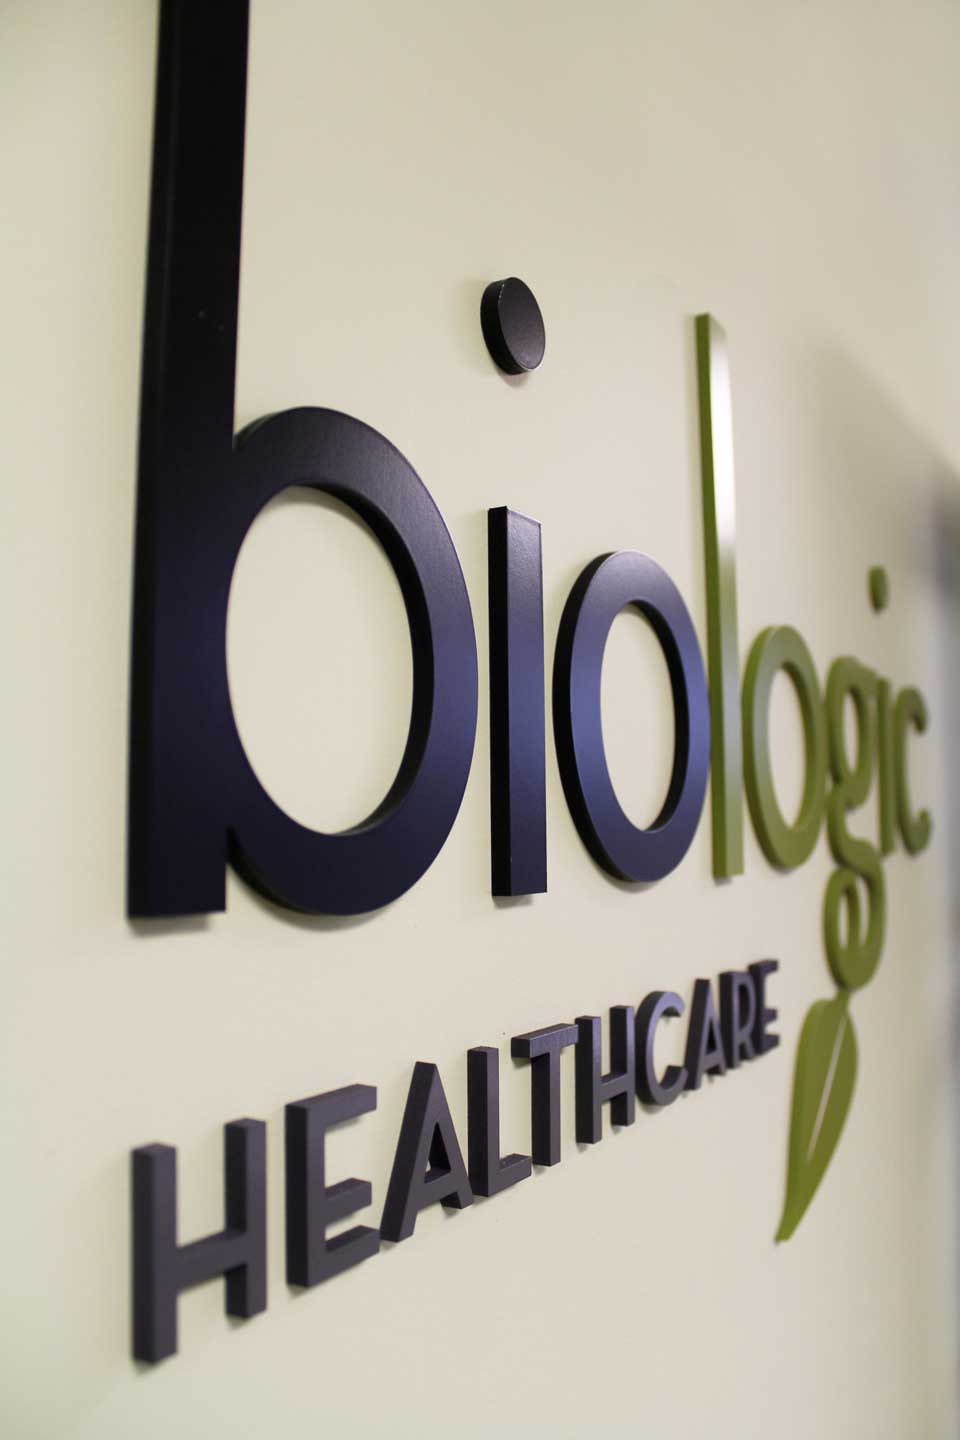 Wall sign that reads: Biologic Healthcare